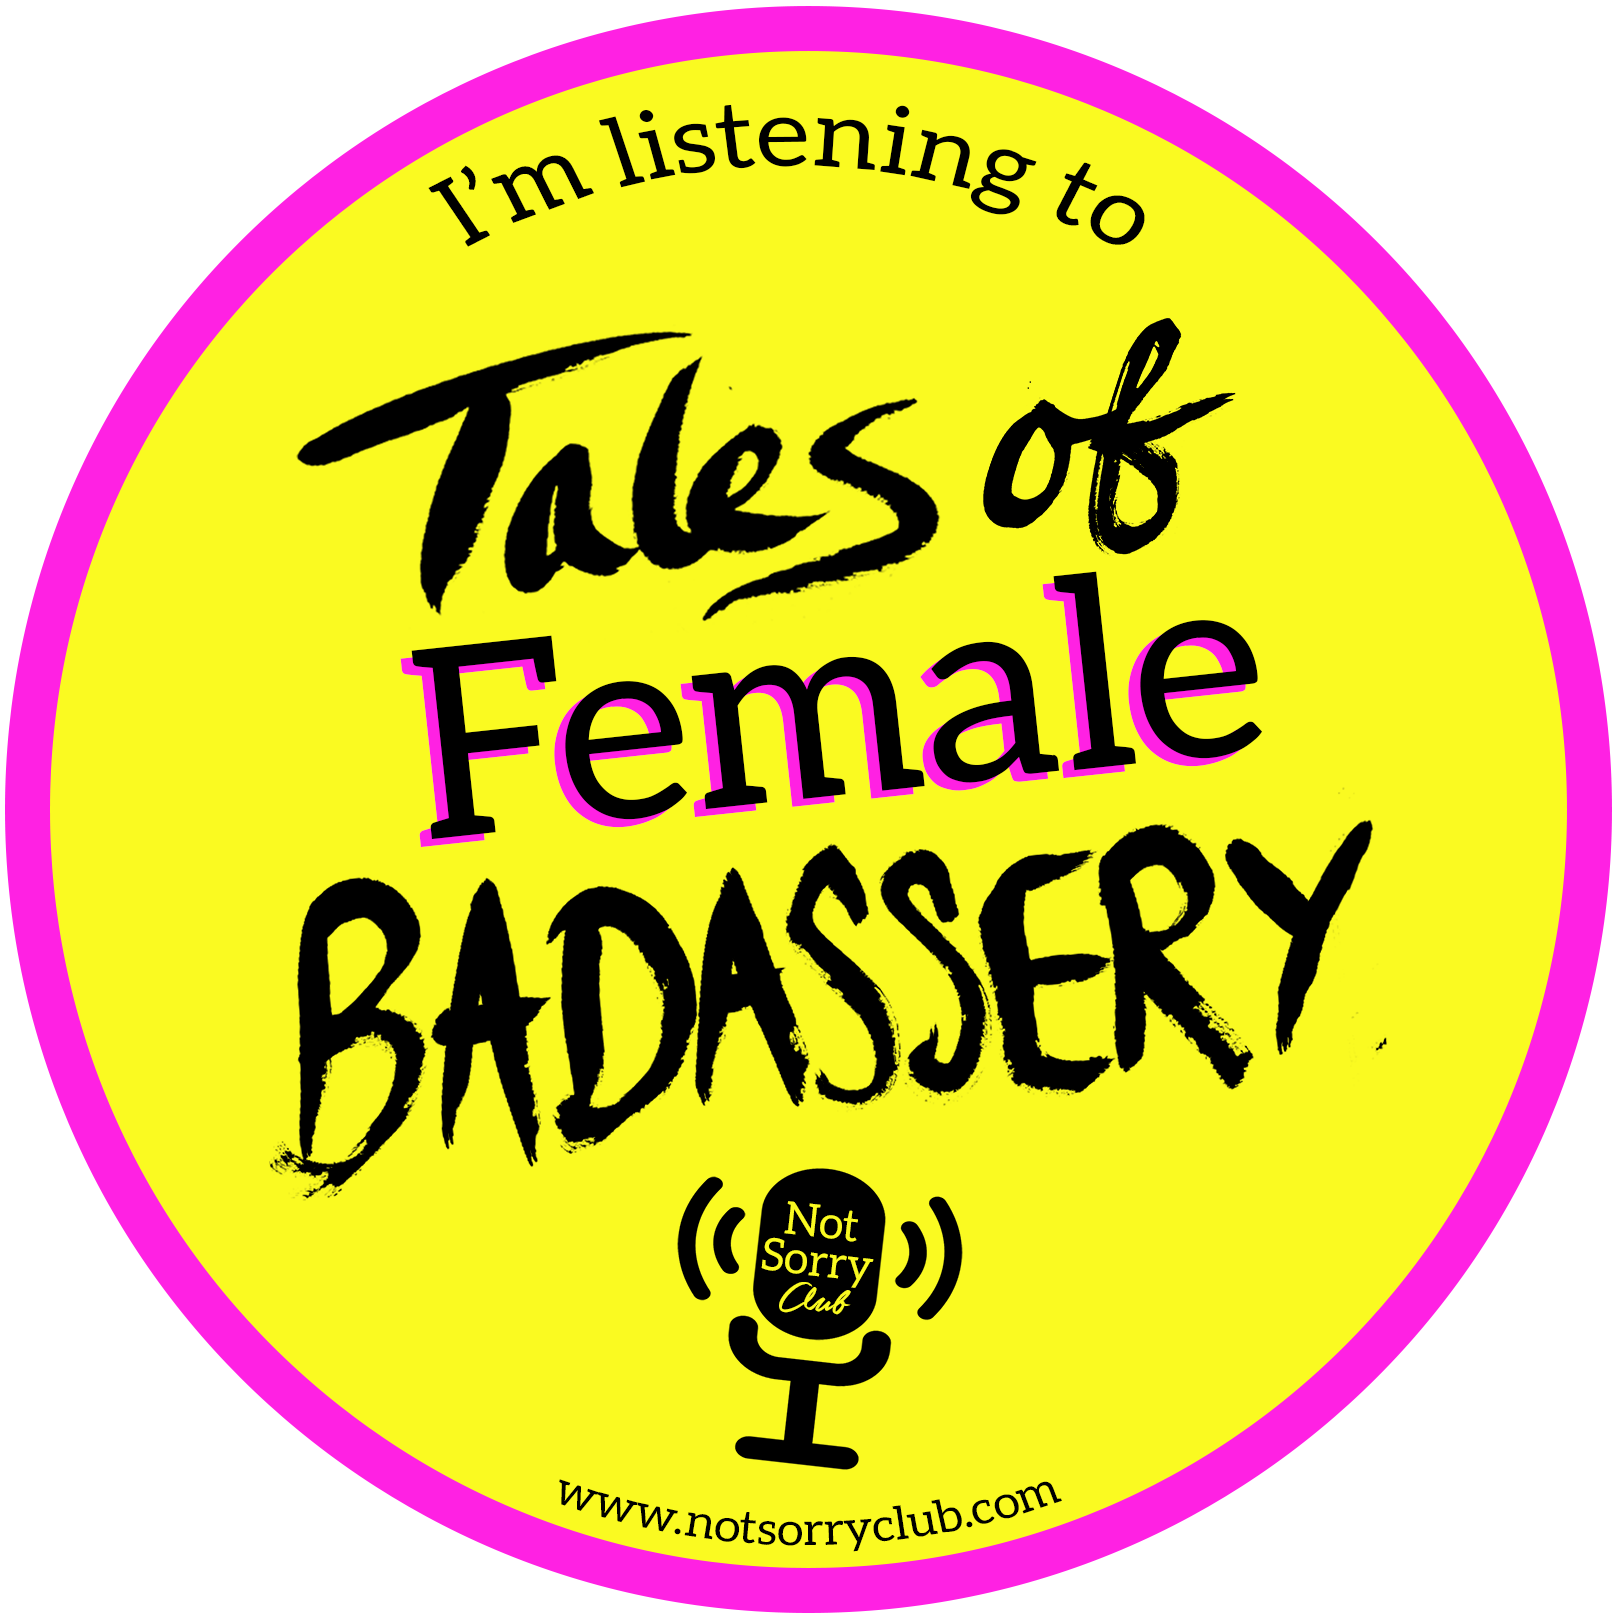 A bright yellow and pink circle logo of the Tales of Female Badassery podcast, with an icon of a microphone.